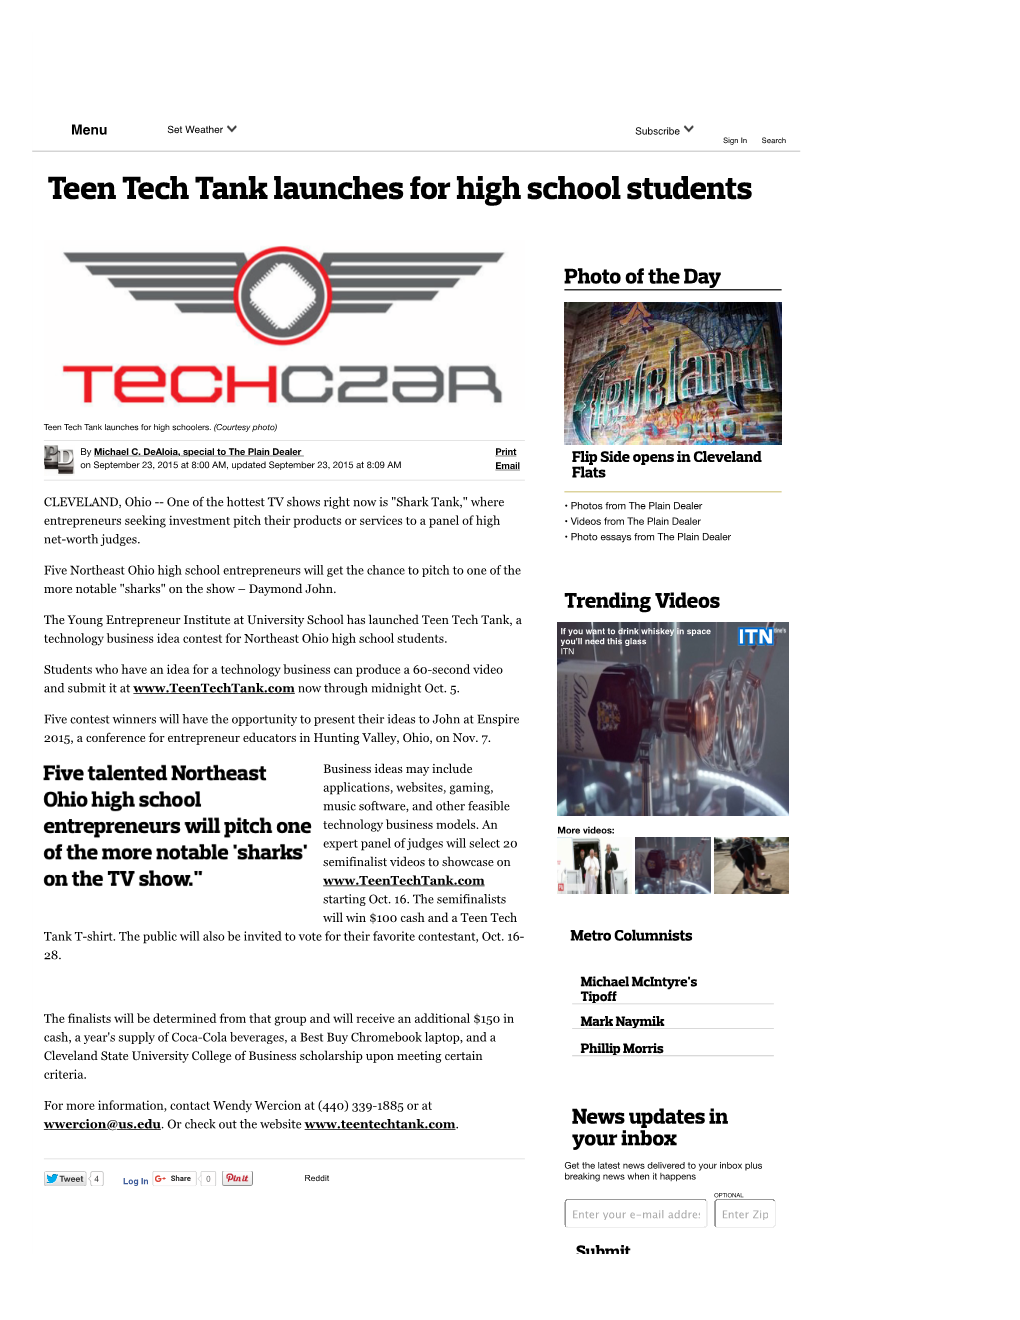 Teen Tech Tank Launches for High School Students | Cleveland.Com